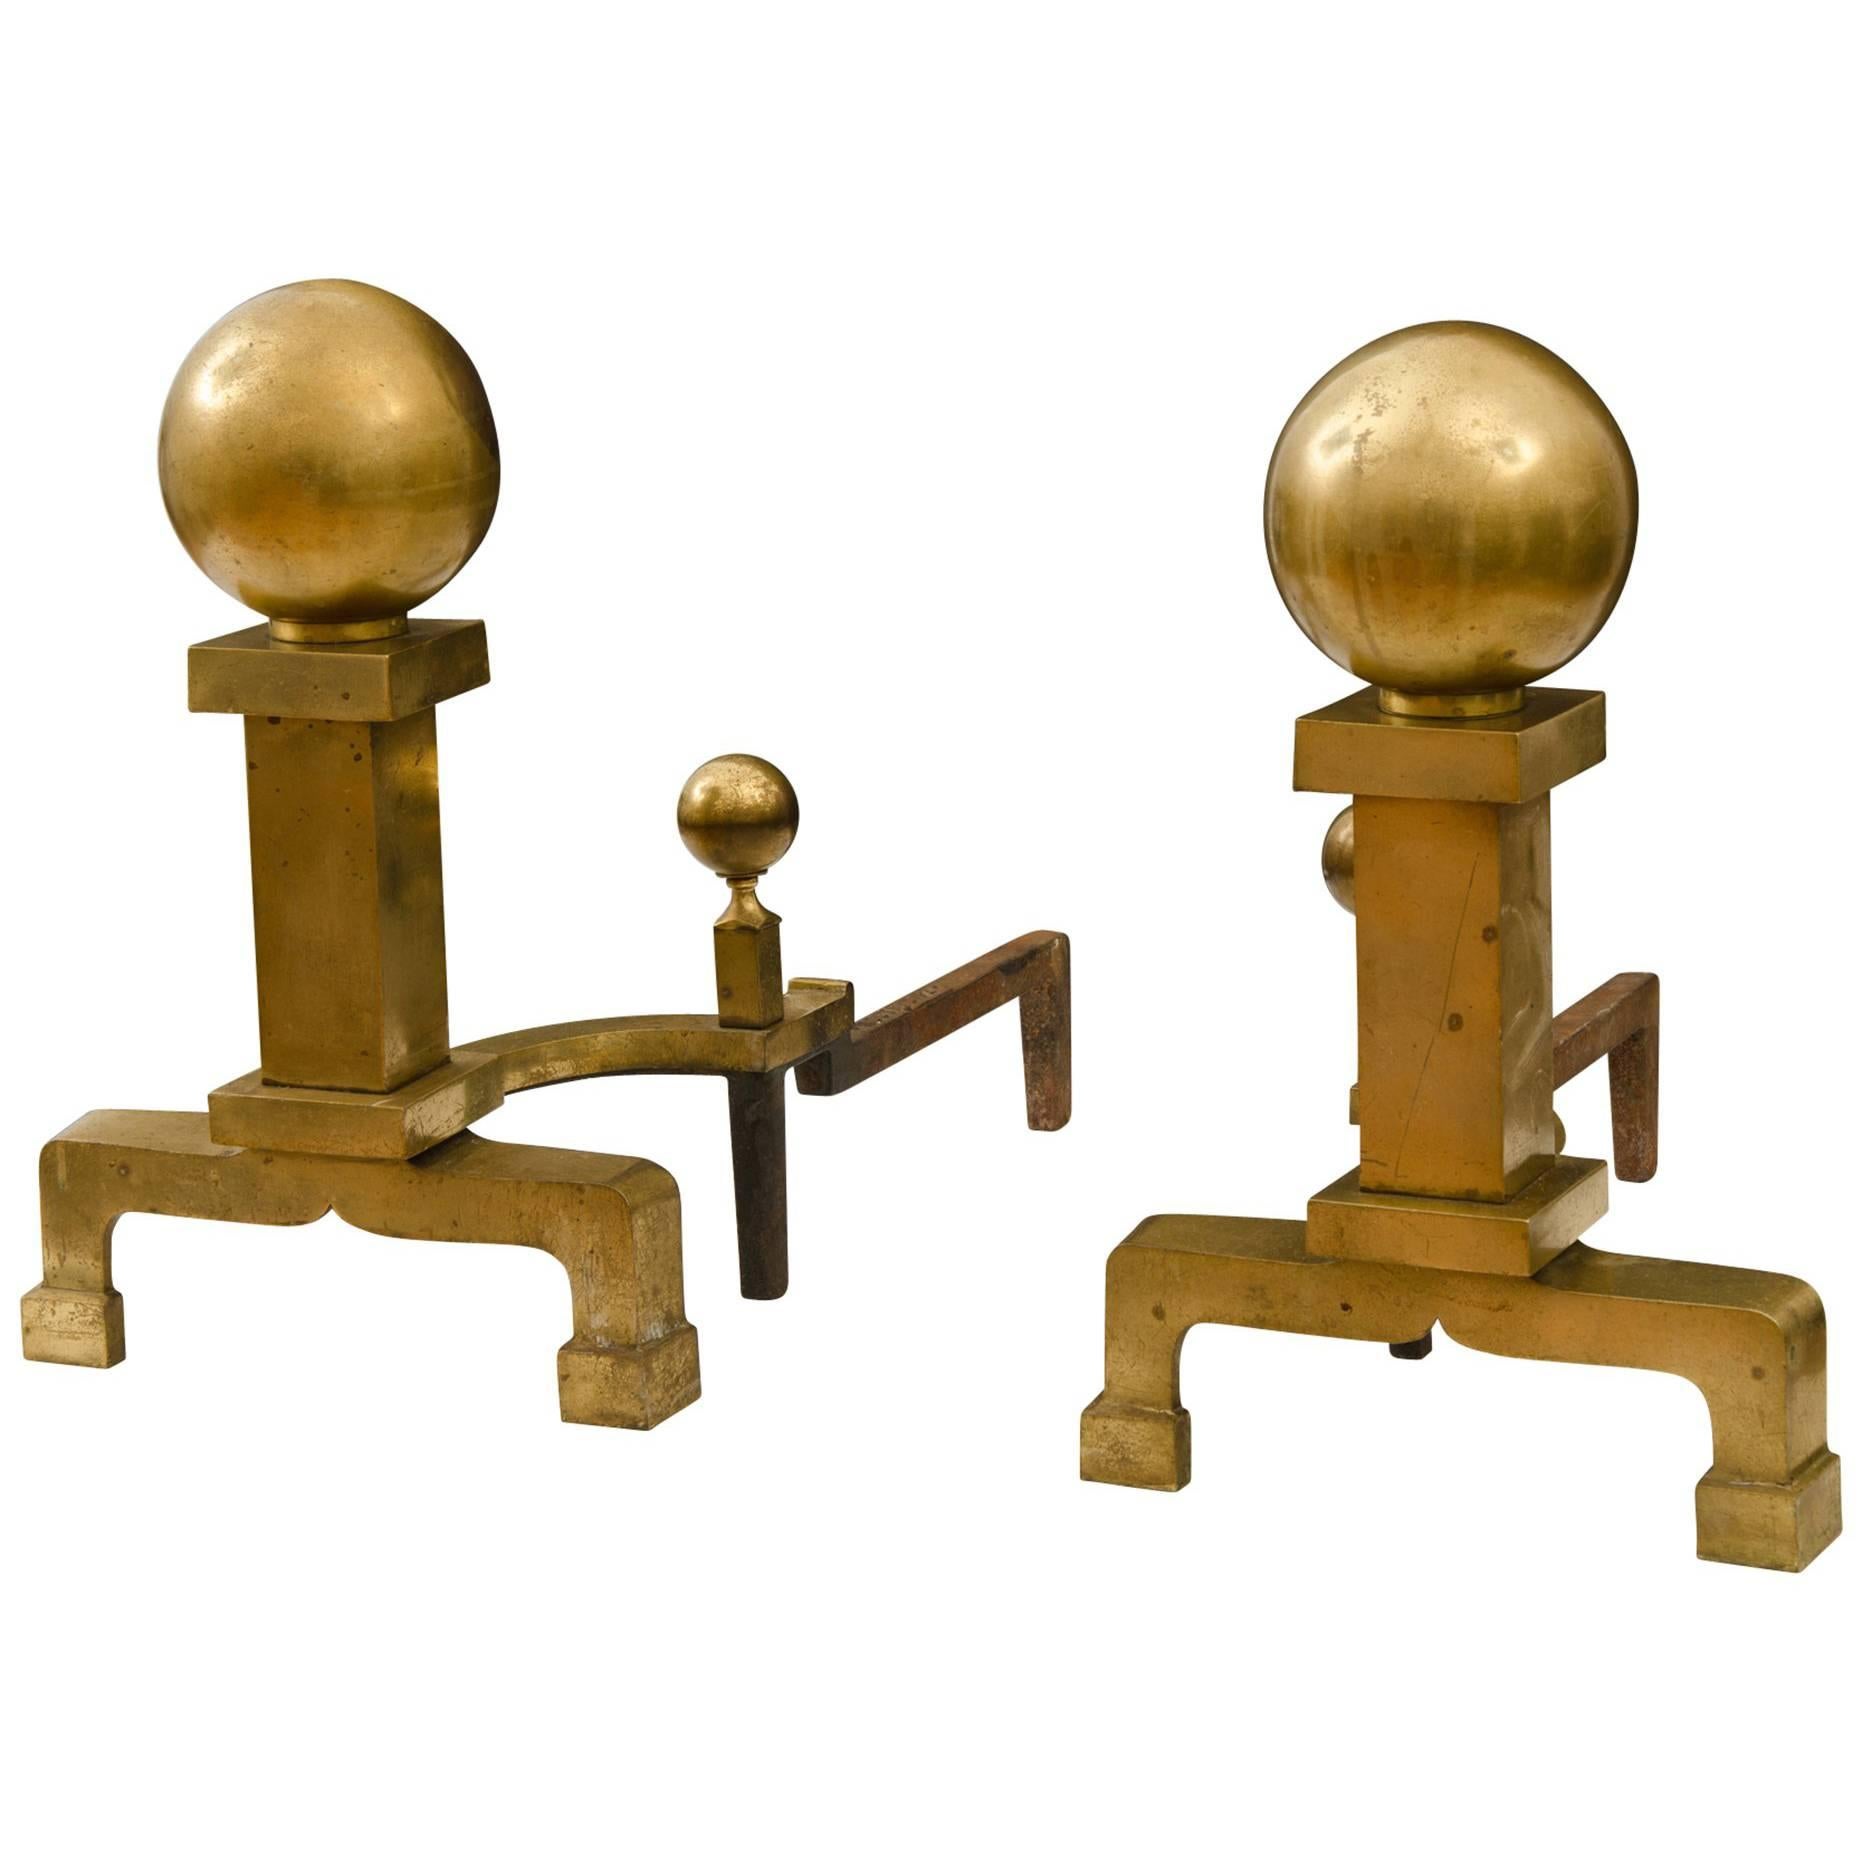 Impressive Brass Andirons by Rostand, circa 1830s For Sale